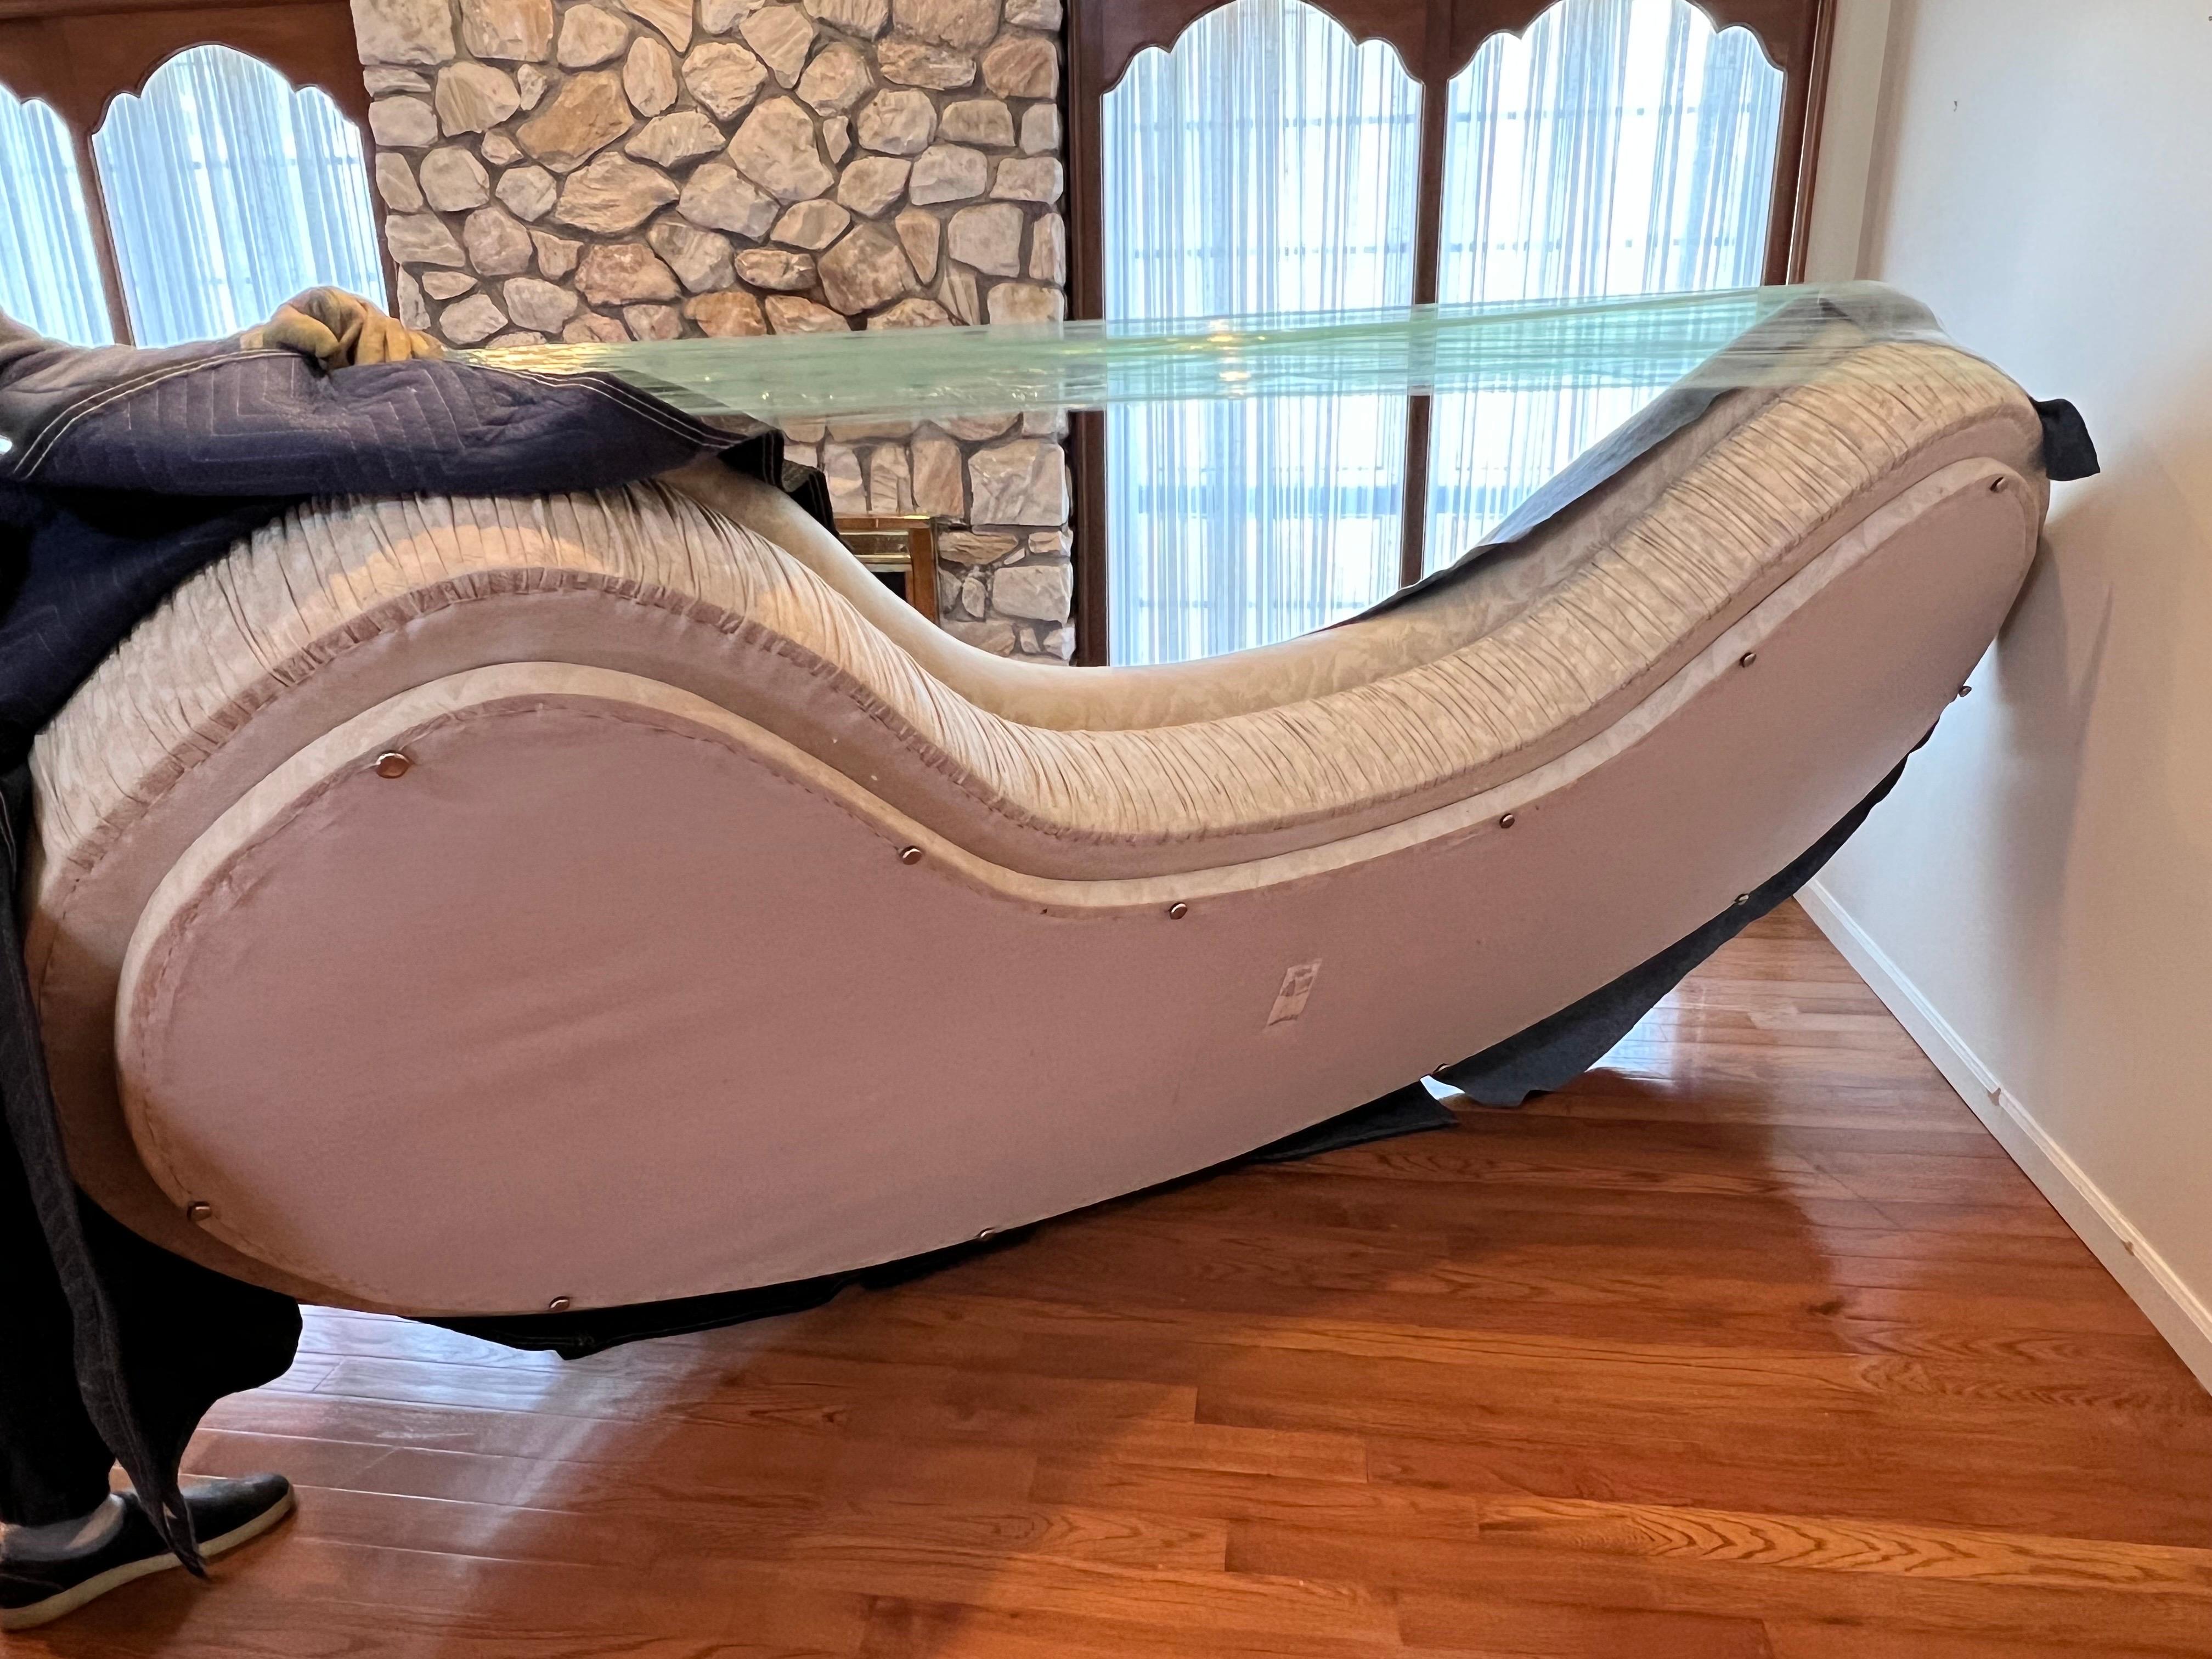 1980s Postmodern Curvy Kidney Sofa In Excellent Condition For Sale In Staten Island, NY